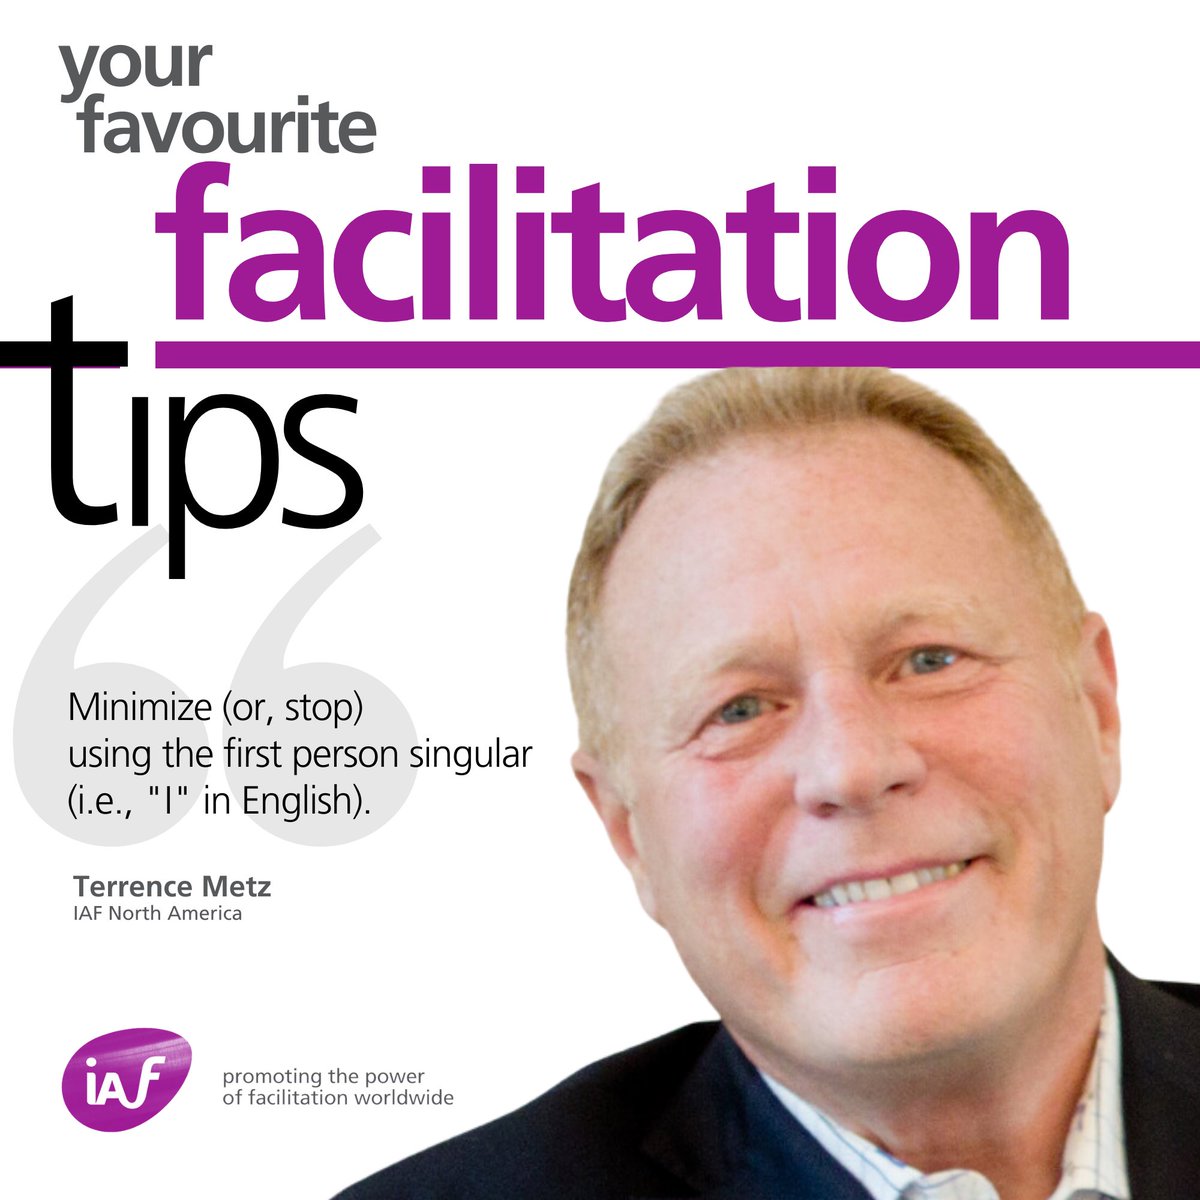 Terrence Metz, an IAF North America member, and a facilitator with 24 years of experience finds it useful to minimize (or, stop) using the first person singular. If you are an IAF member, please write in to iaf-world.org/site/forms/you… your favourite facilitation tip.